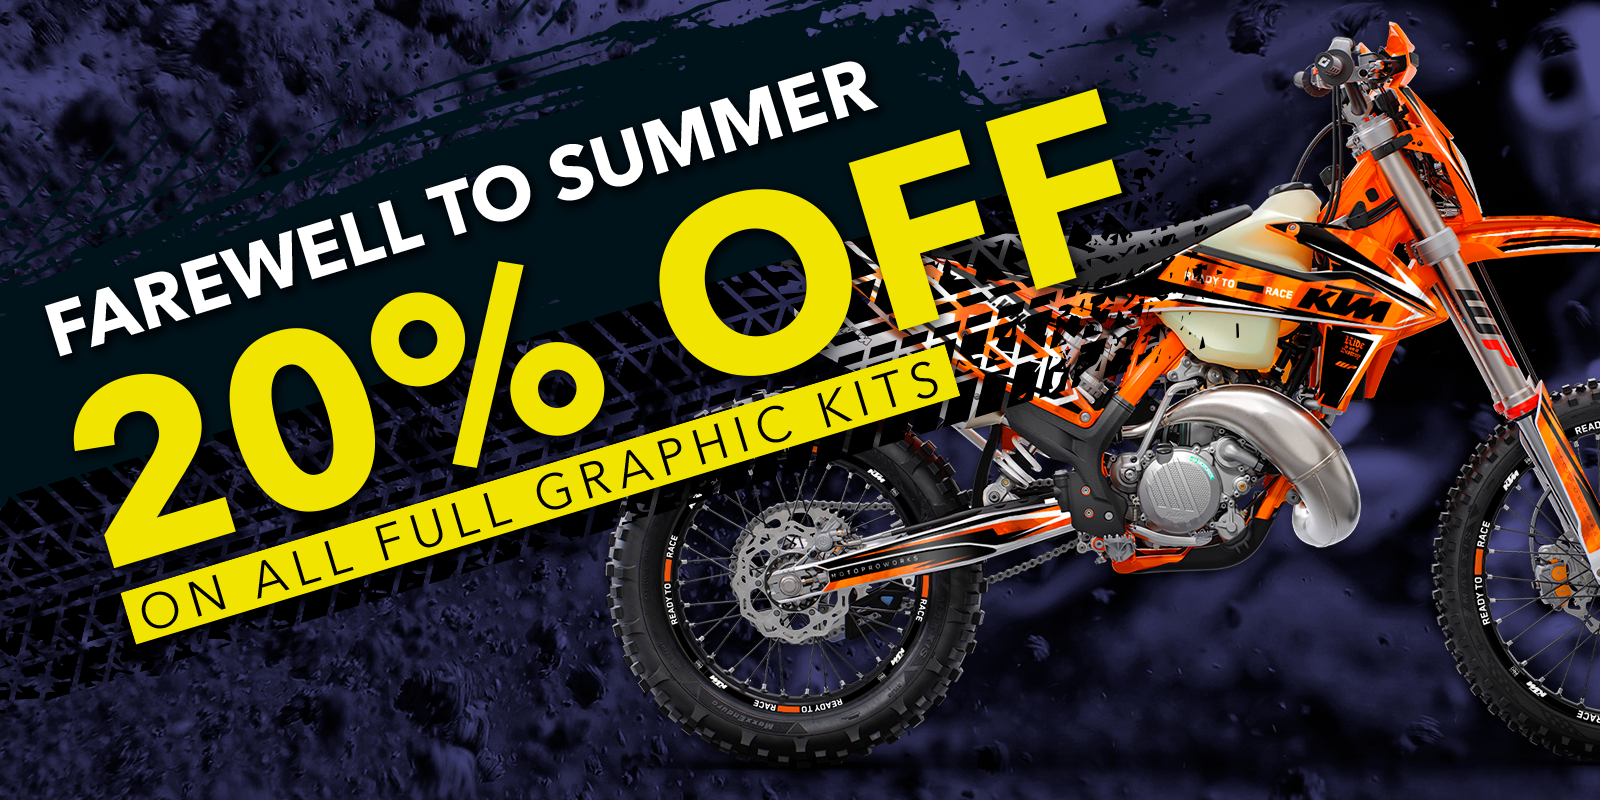 Farewell To Summer - 20% off Sale - Motoproworks - Bike Graphic Kits